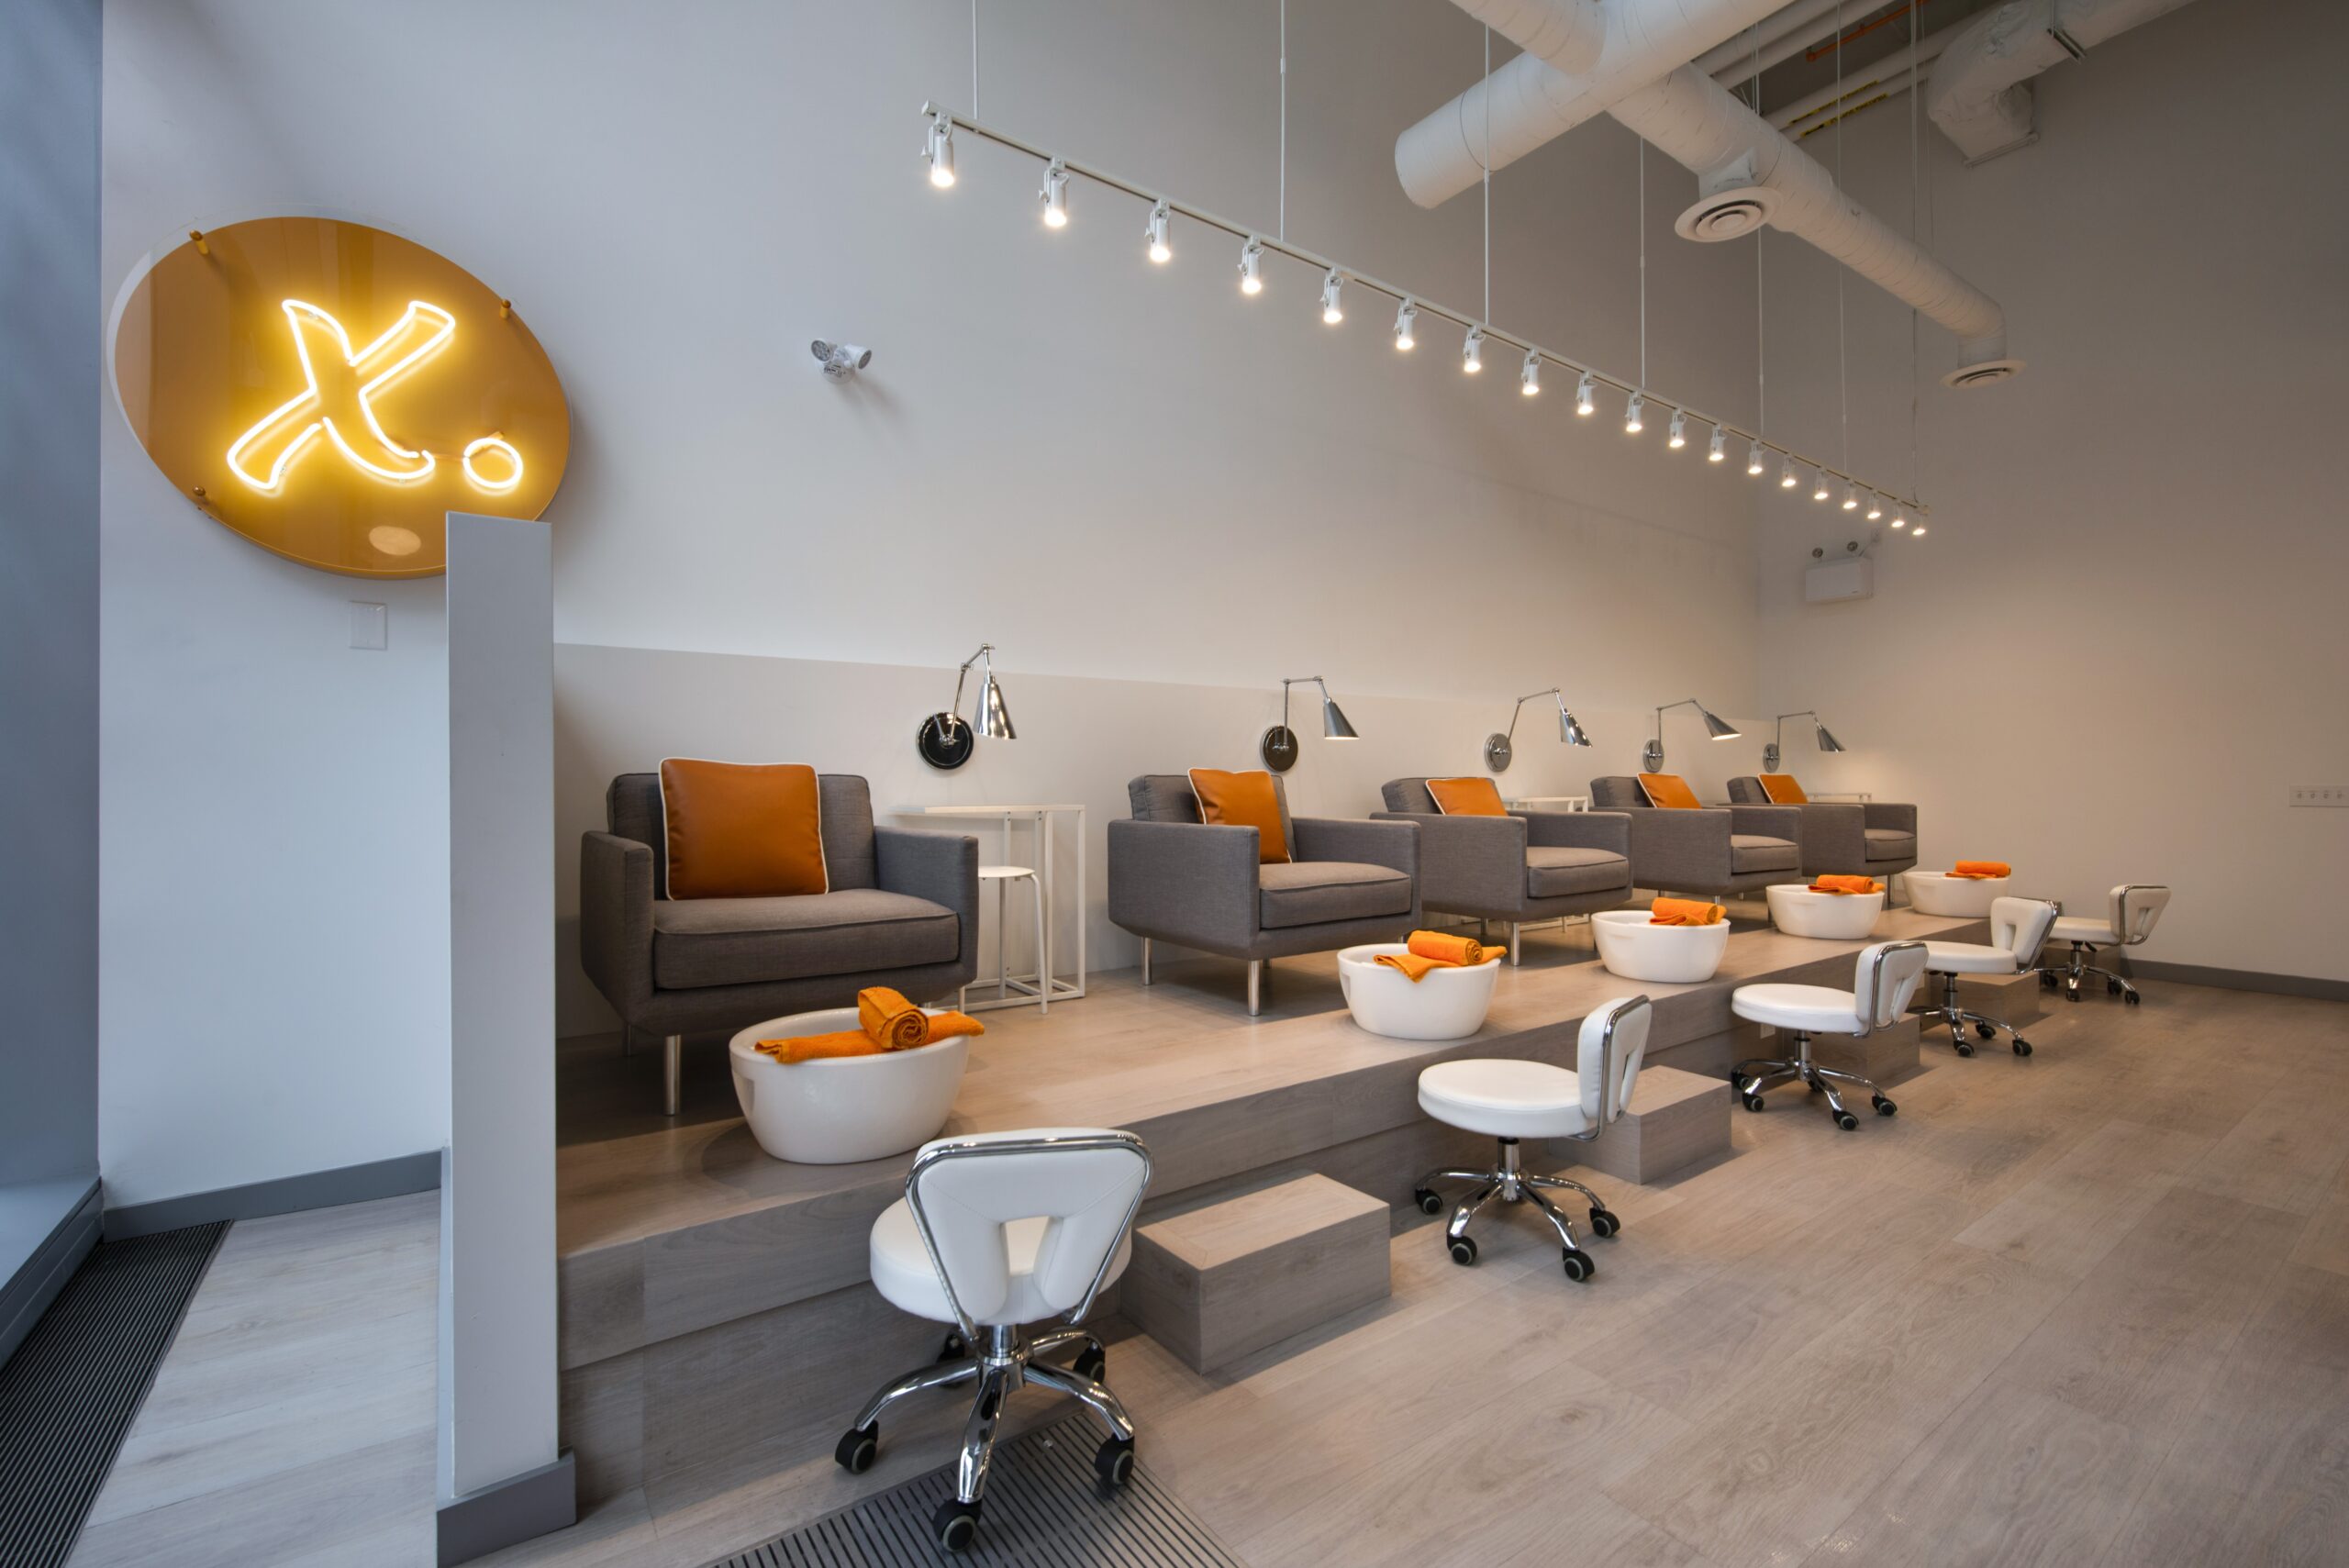 pedicure seats with orange pillows